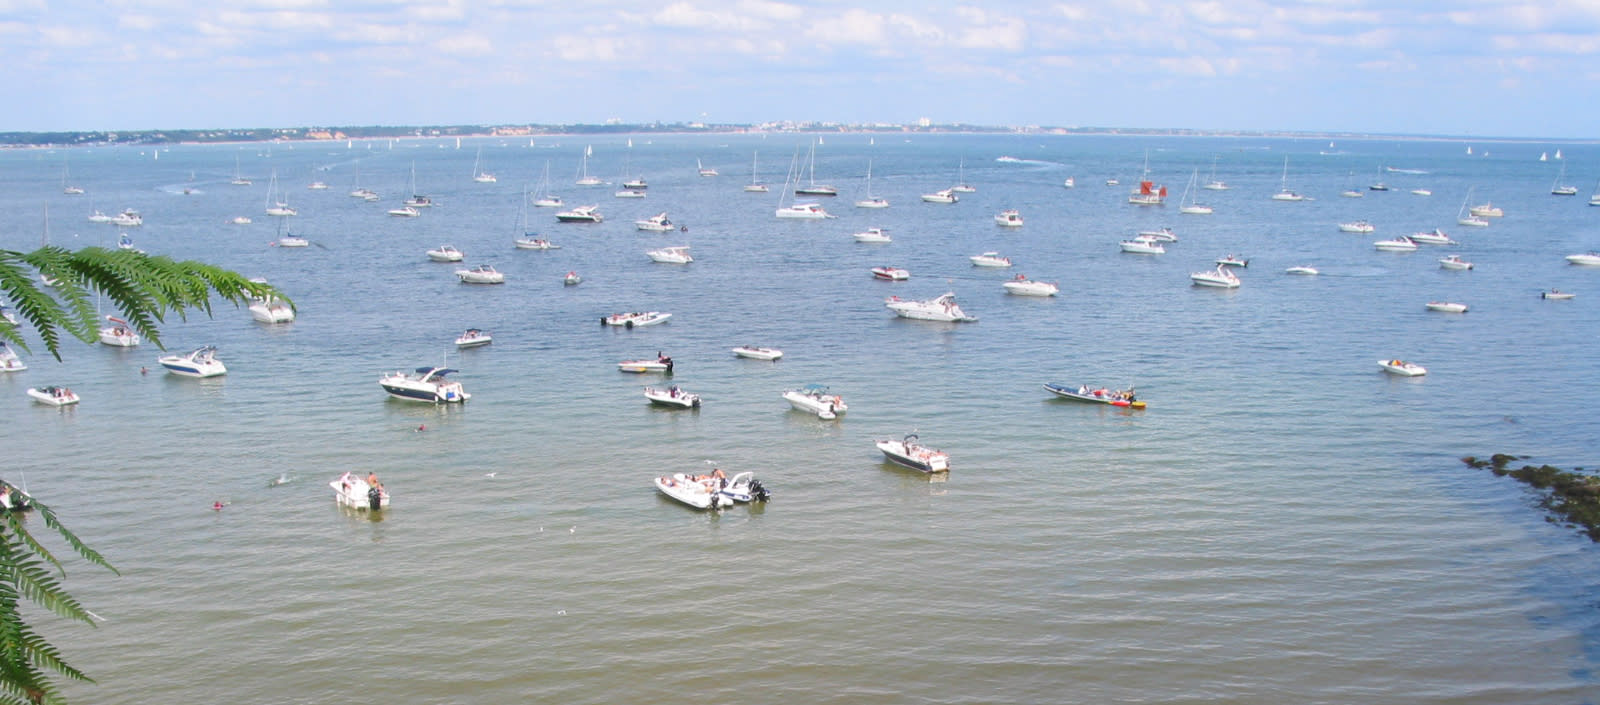 View of boats in Studland Bay